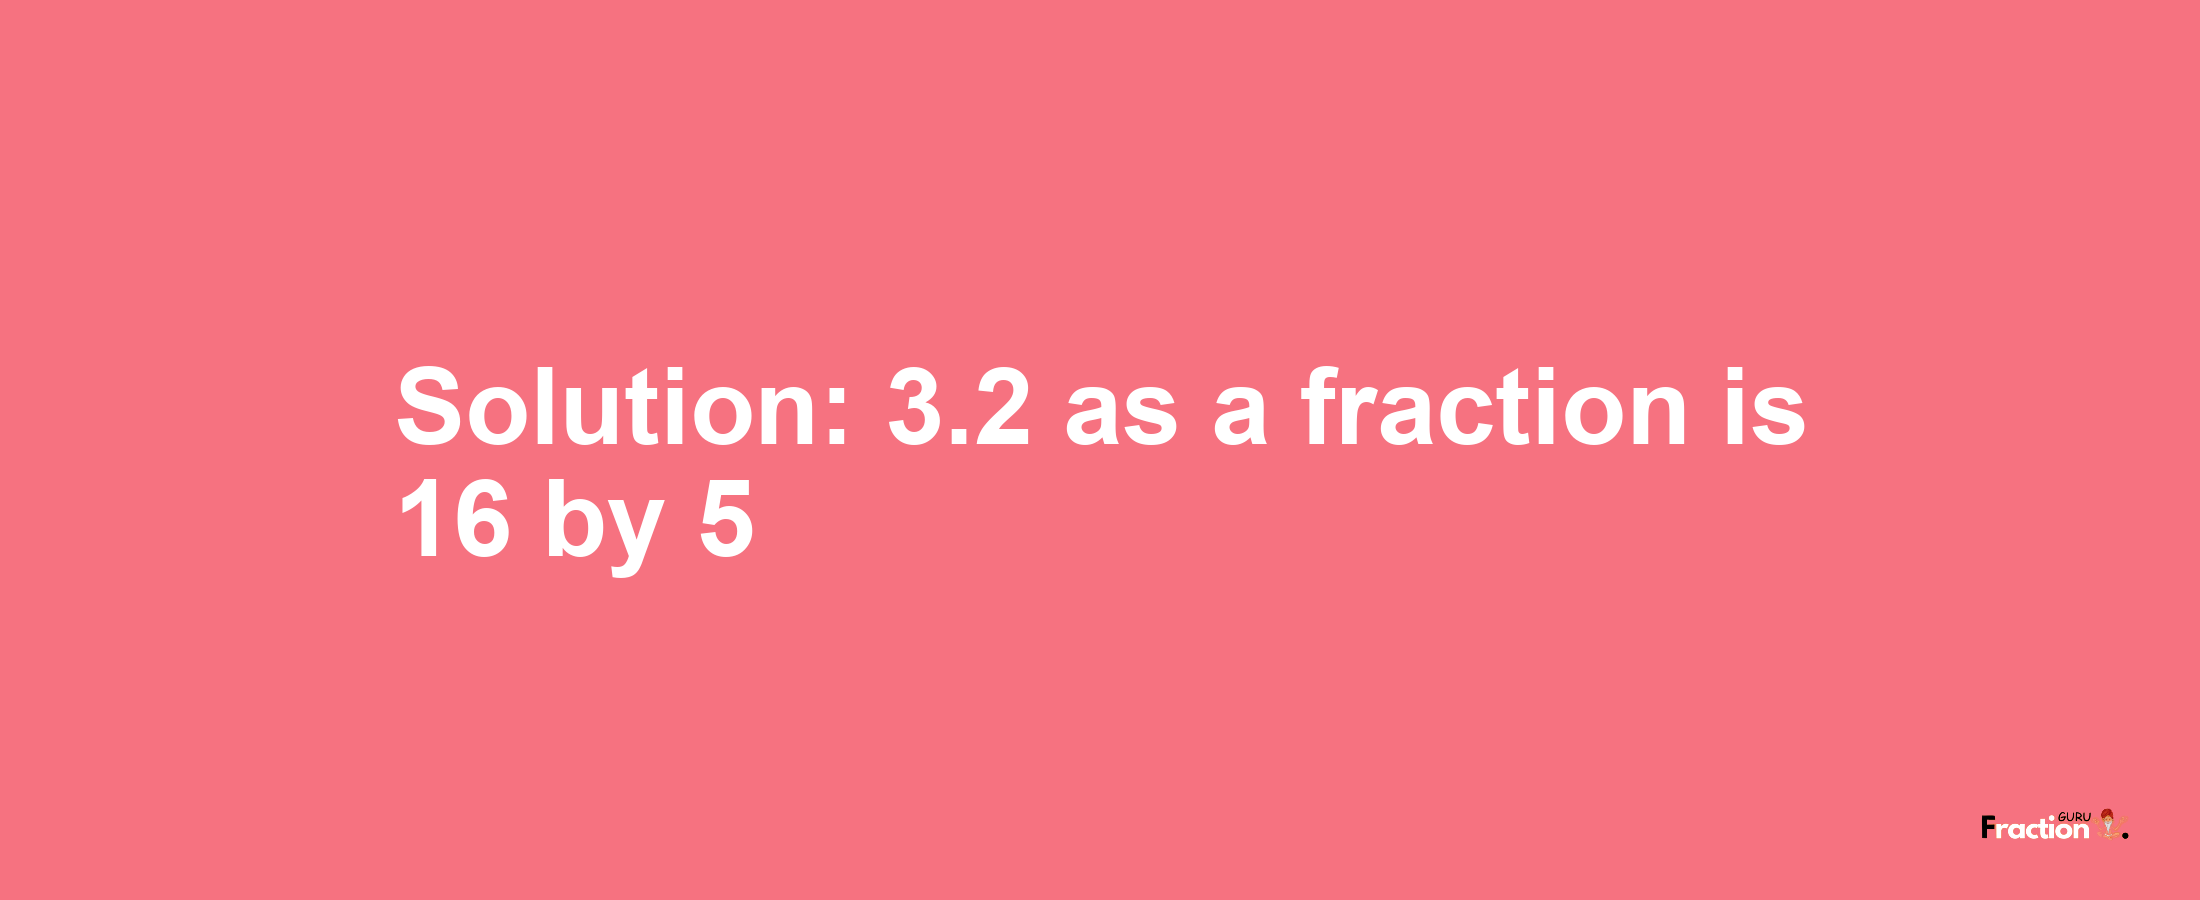 Solution:3.2 as a fraction is 16/5